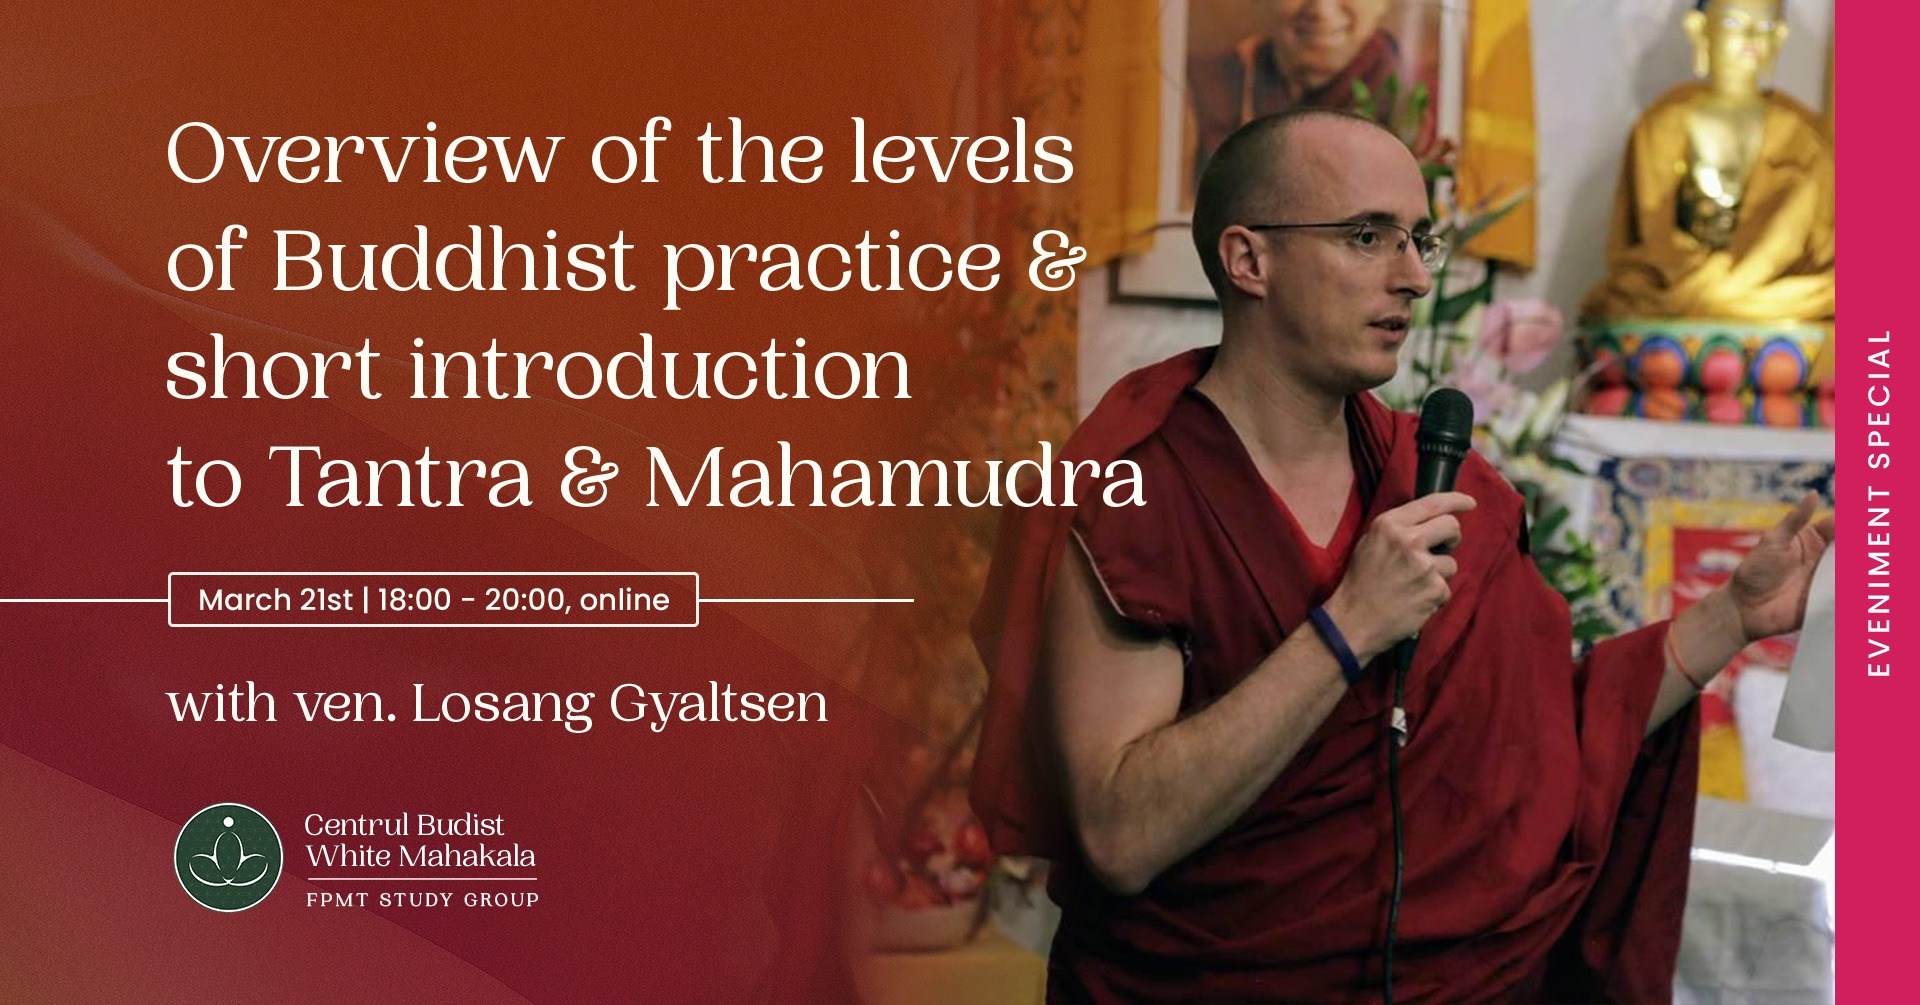 Overview of the levels of Buddhist practice and short introduction to Tantra & Mahamudra